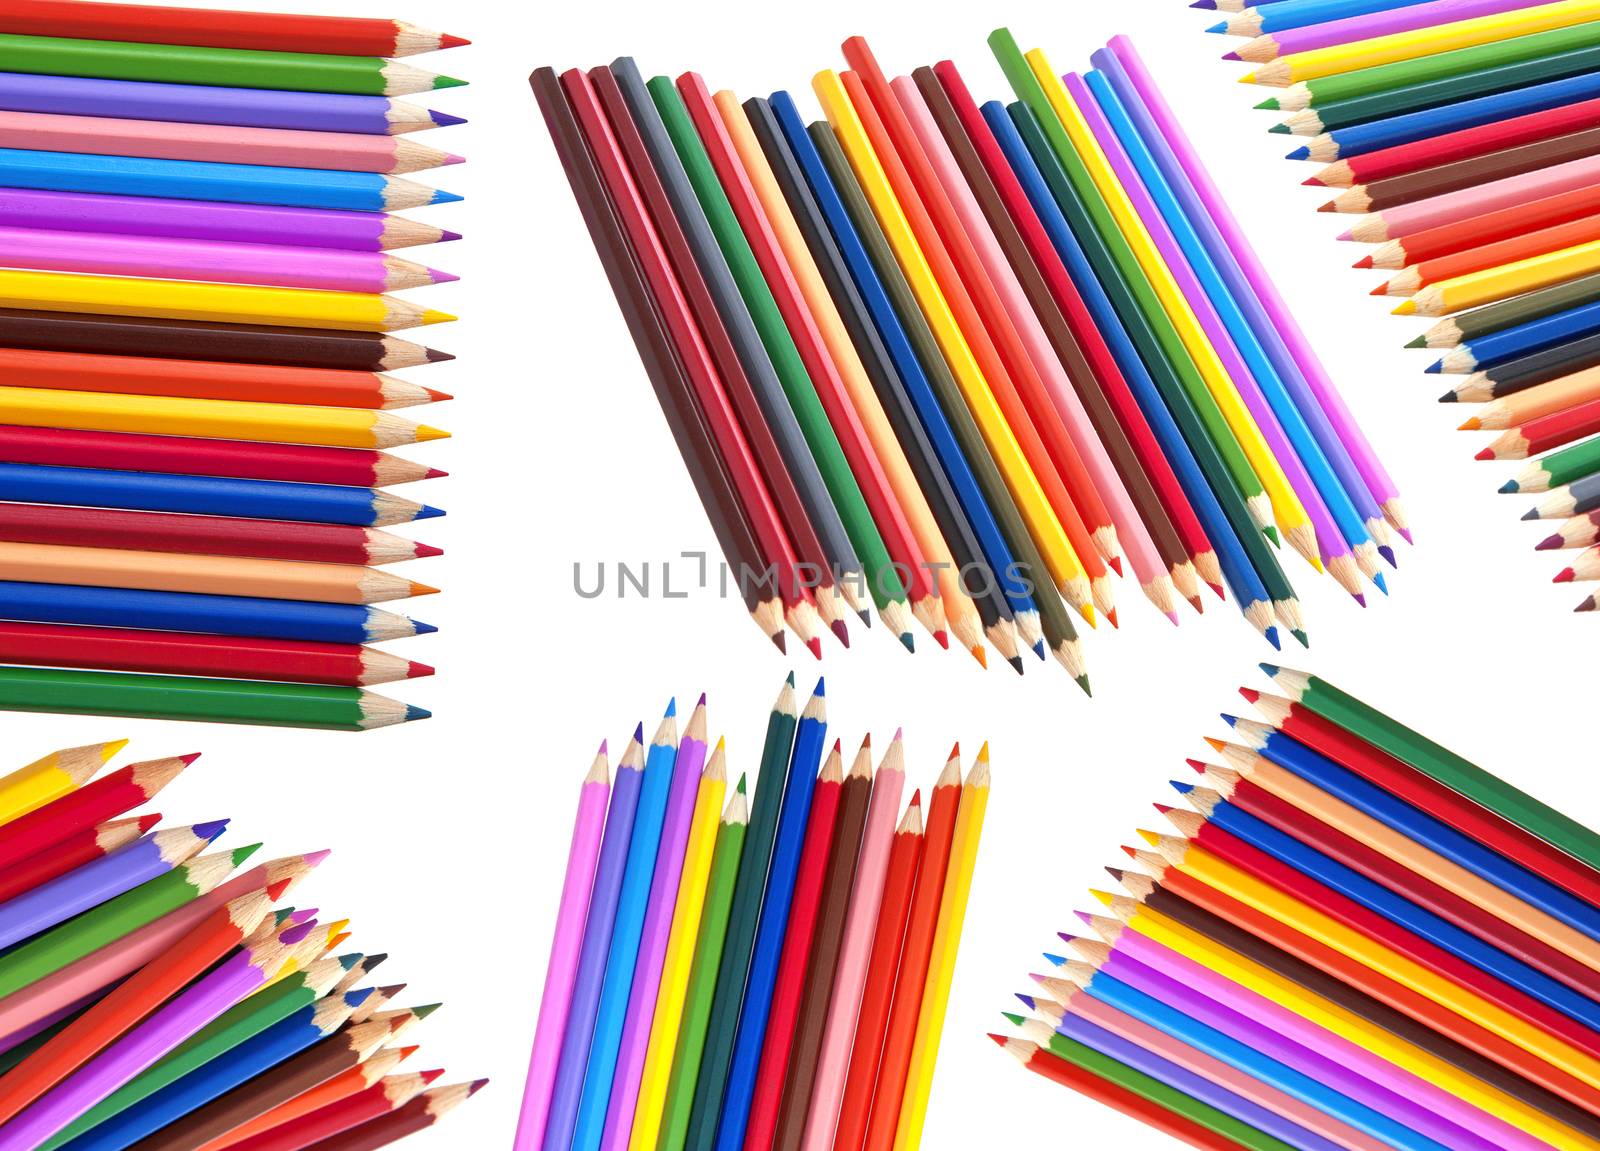 Colored pencils isolated on white background by xamtiw